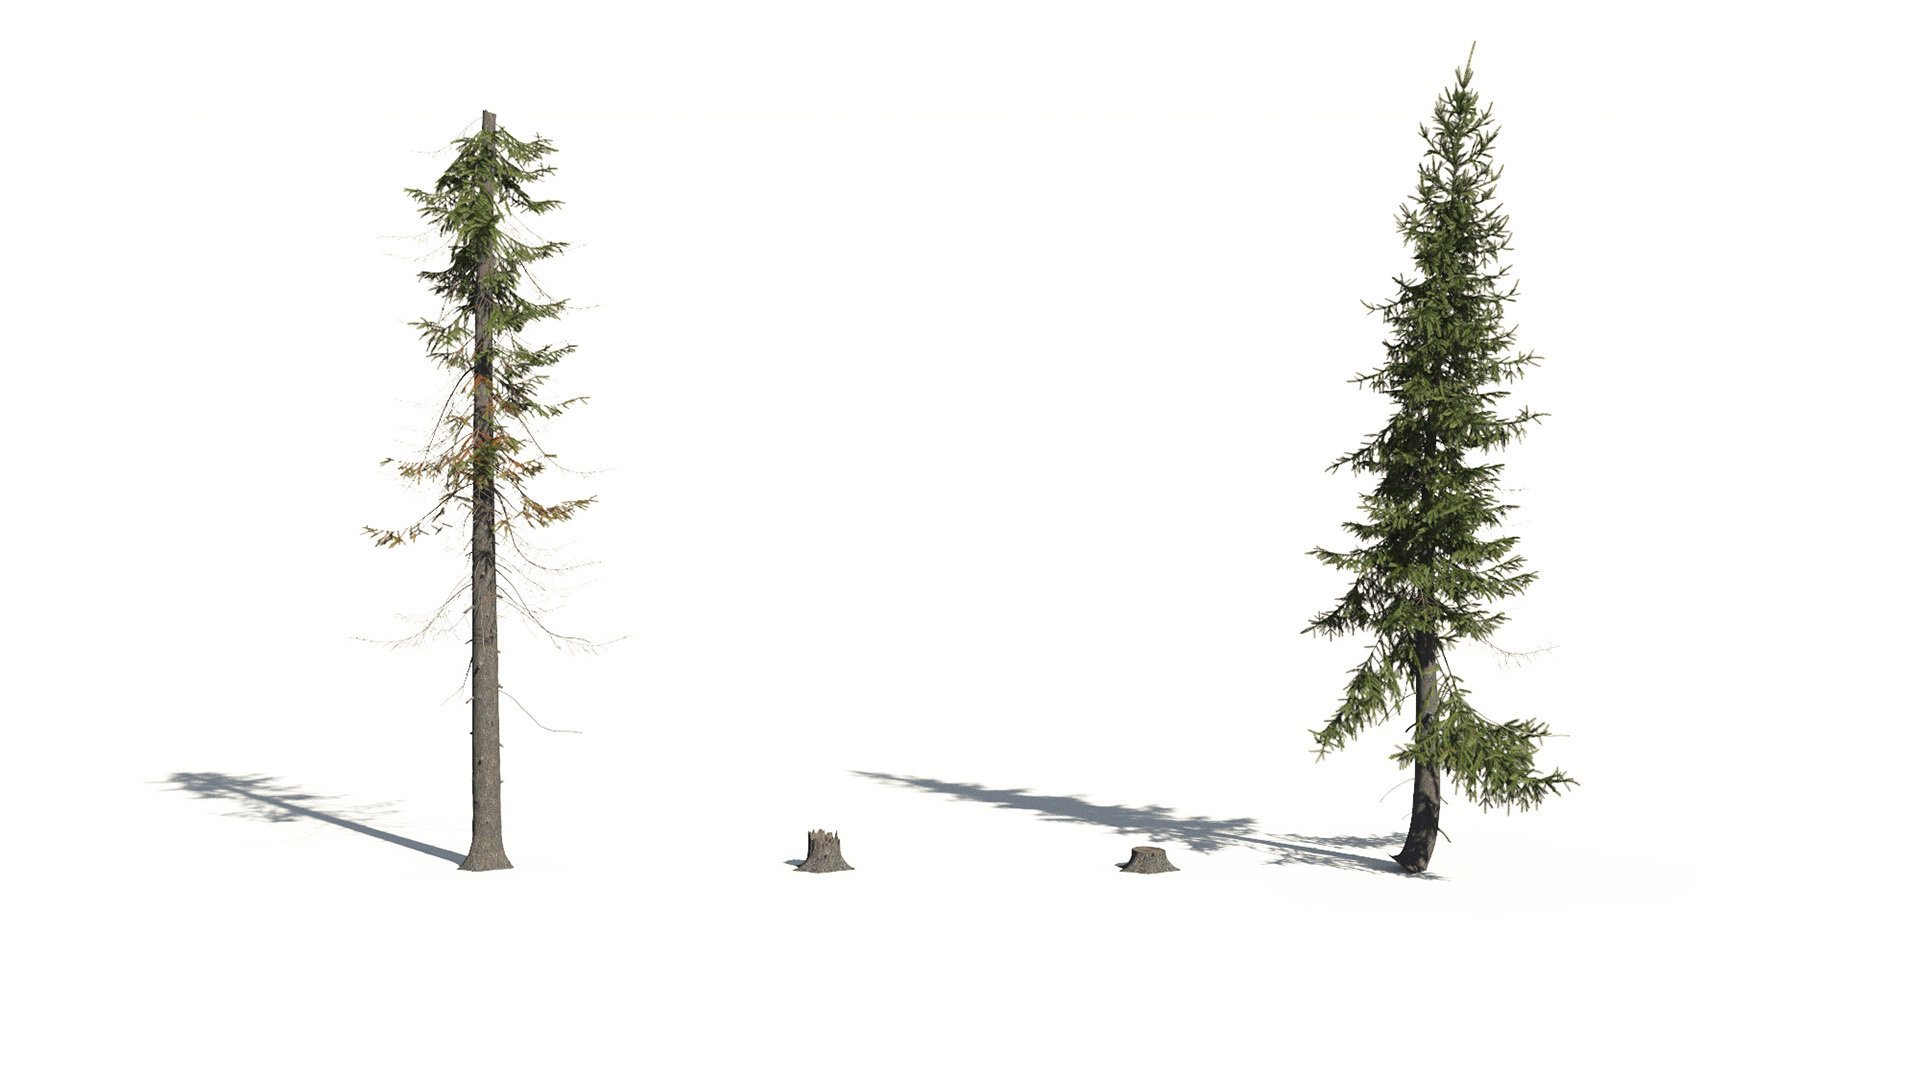 3D model of the Black spruce Picea mariana